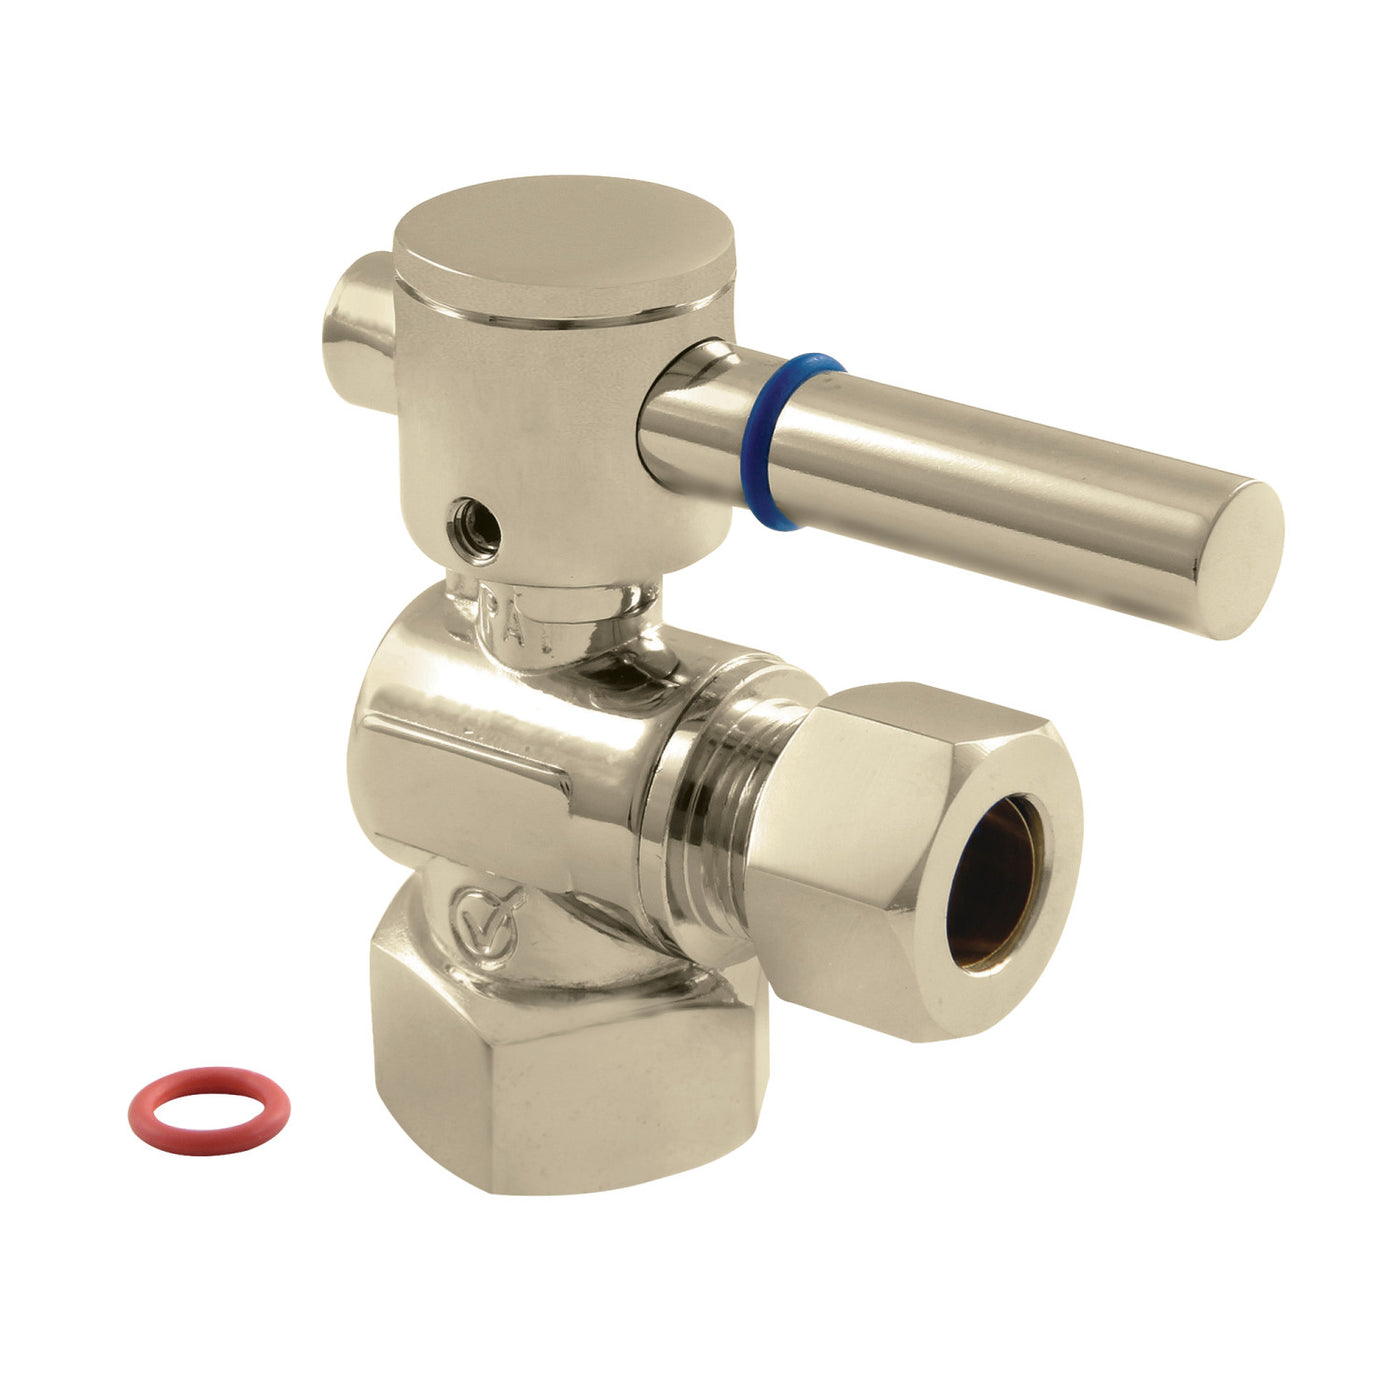 Elements of Design ECC44408DL 1/2-Inch FIP x 1/2-Inch OD Comp Angle Stop Valve, Brushed Nickel